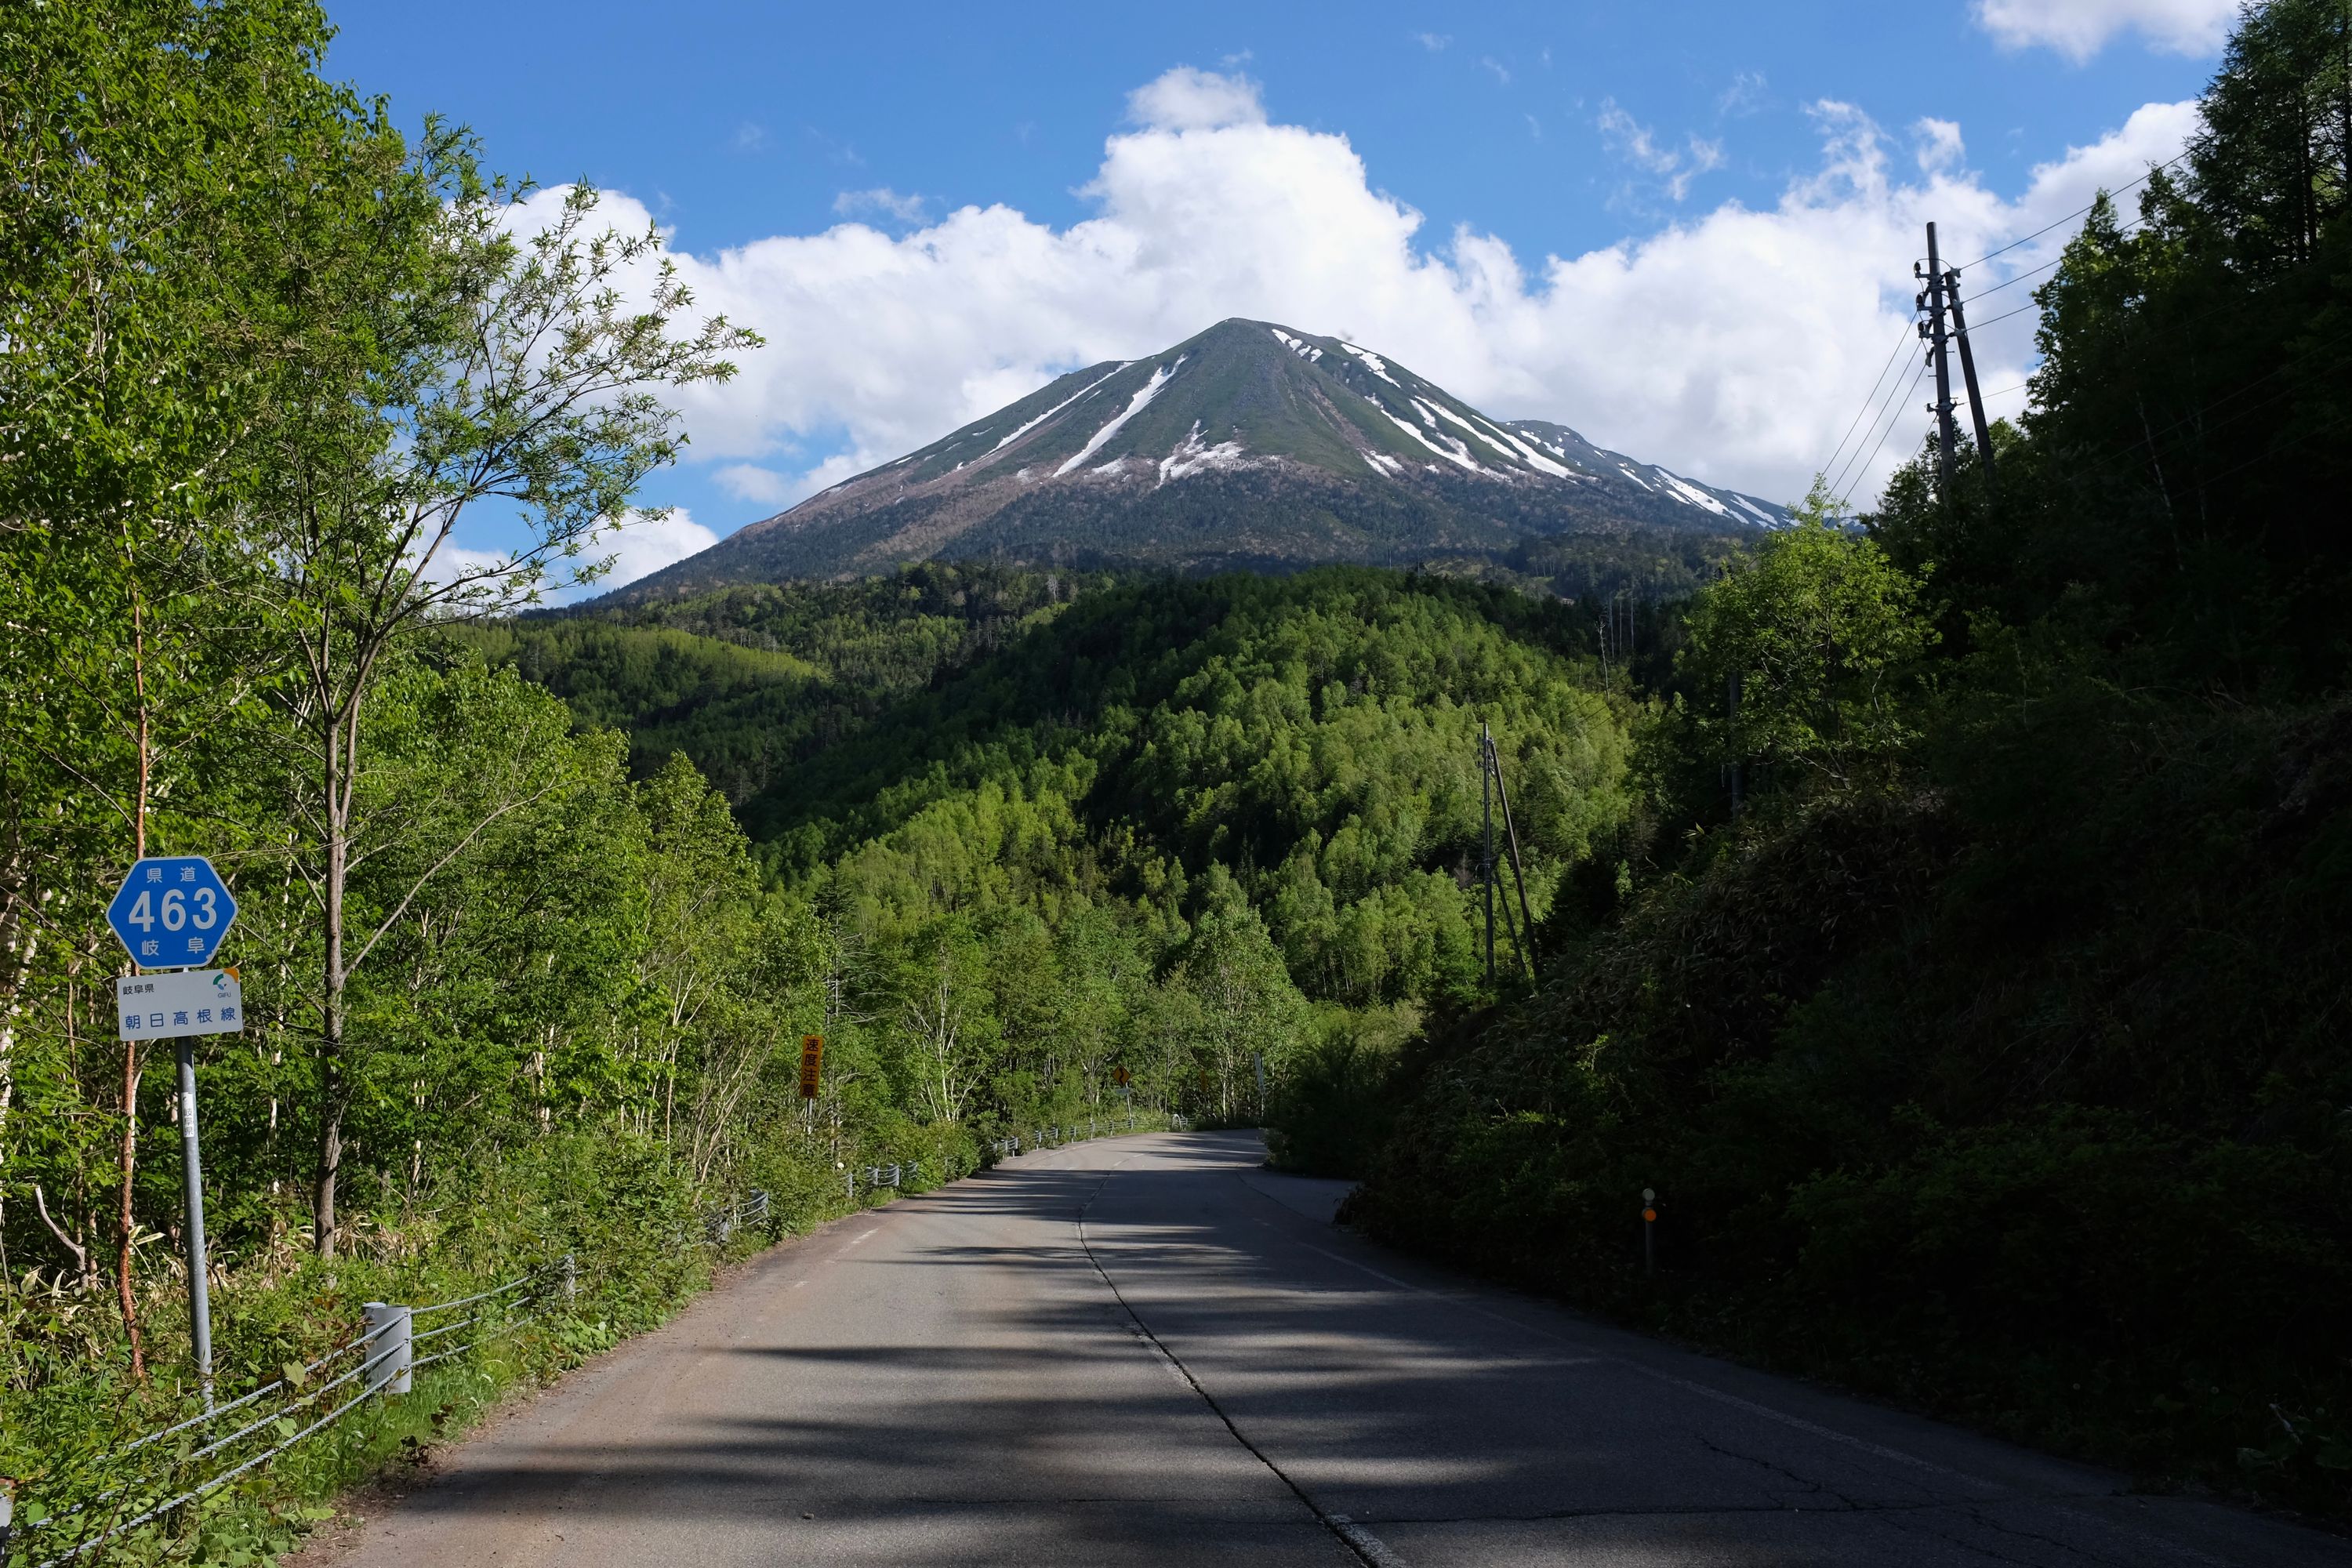 The snow-streaked northern flank of Mount Ontake as seen from Route 463 in Gifu.